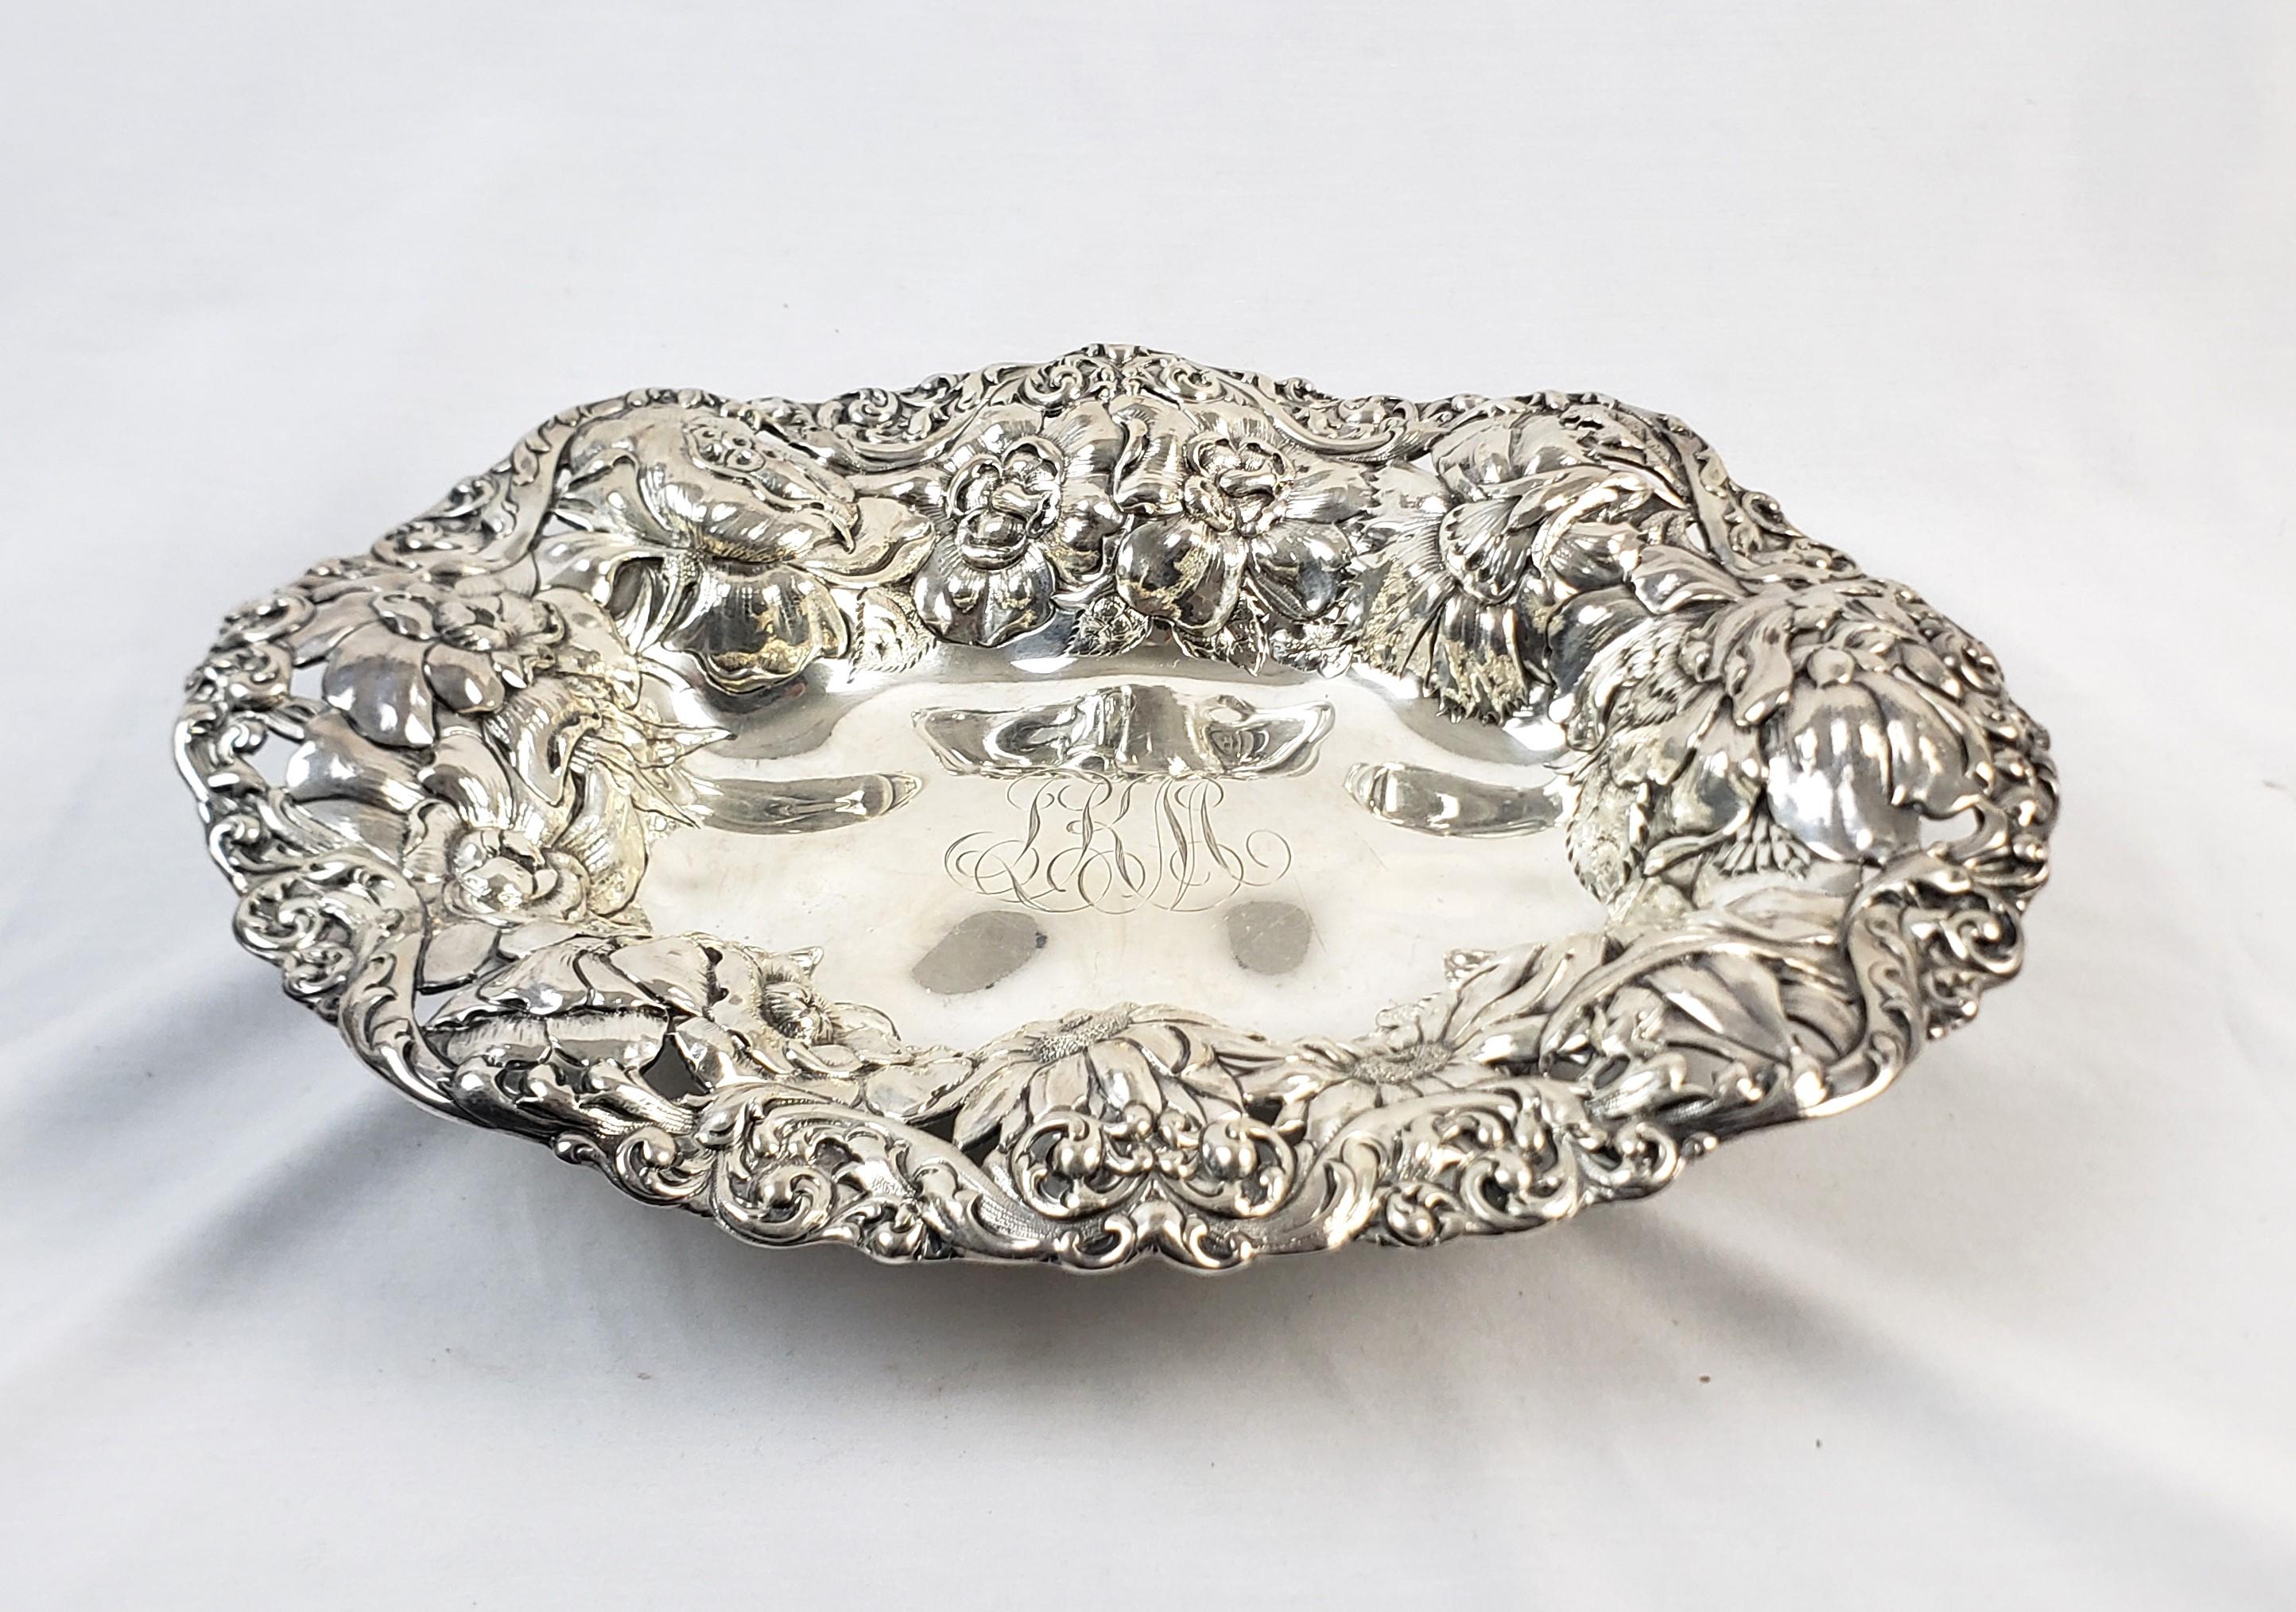 Victorian Antique Gorham Sterling Silver Bowl with Ornate Chased Floral Decoration For Sale